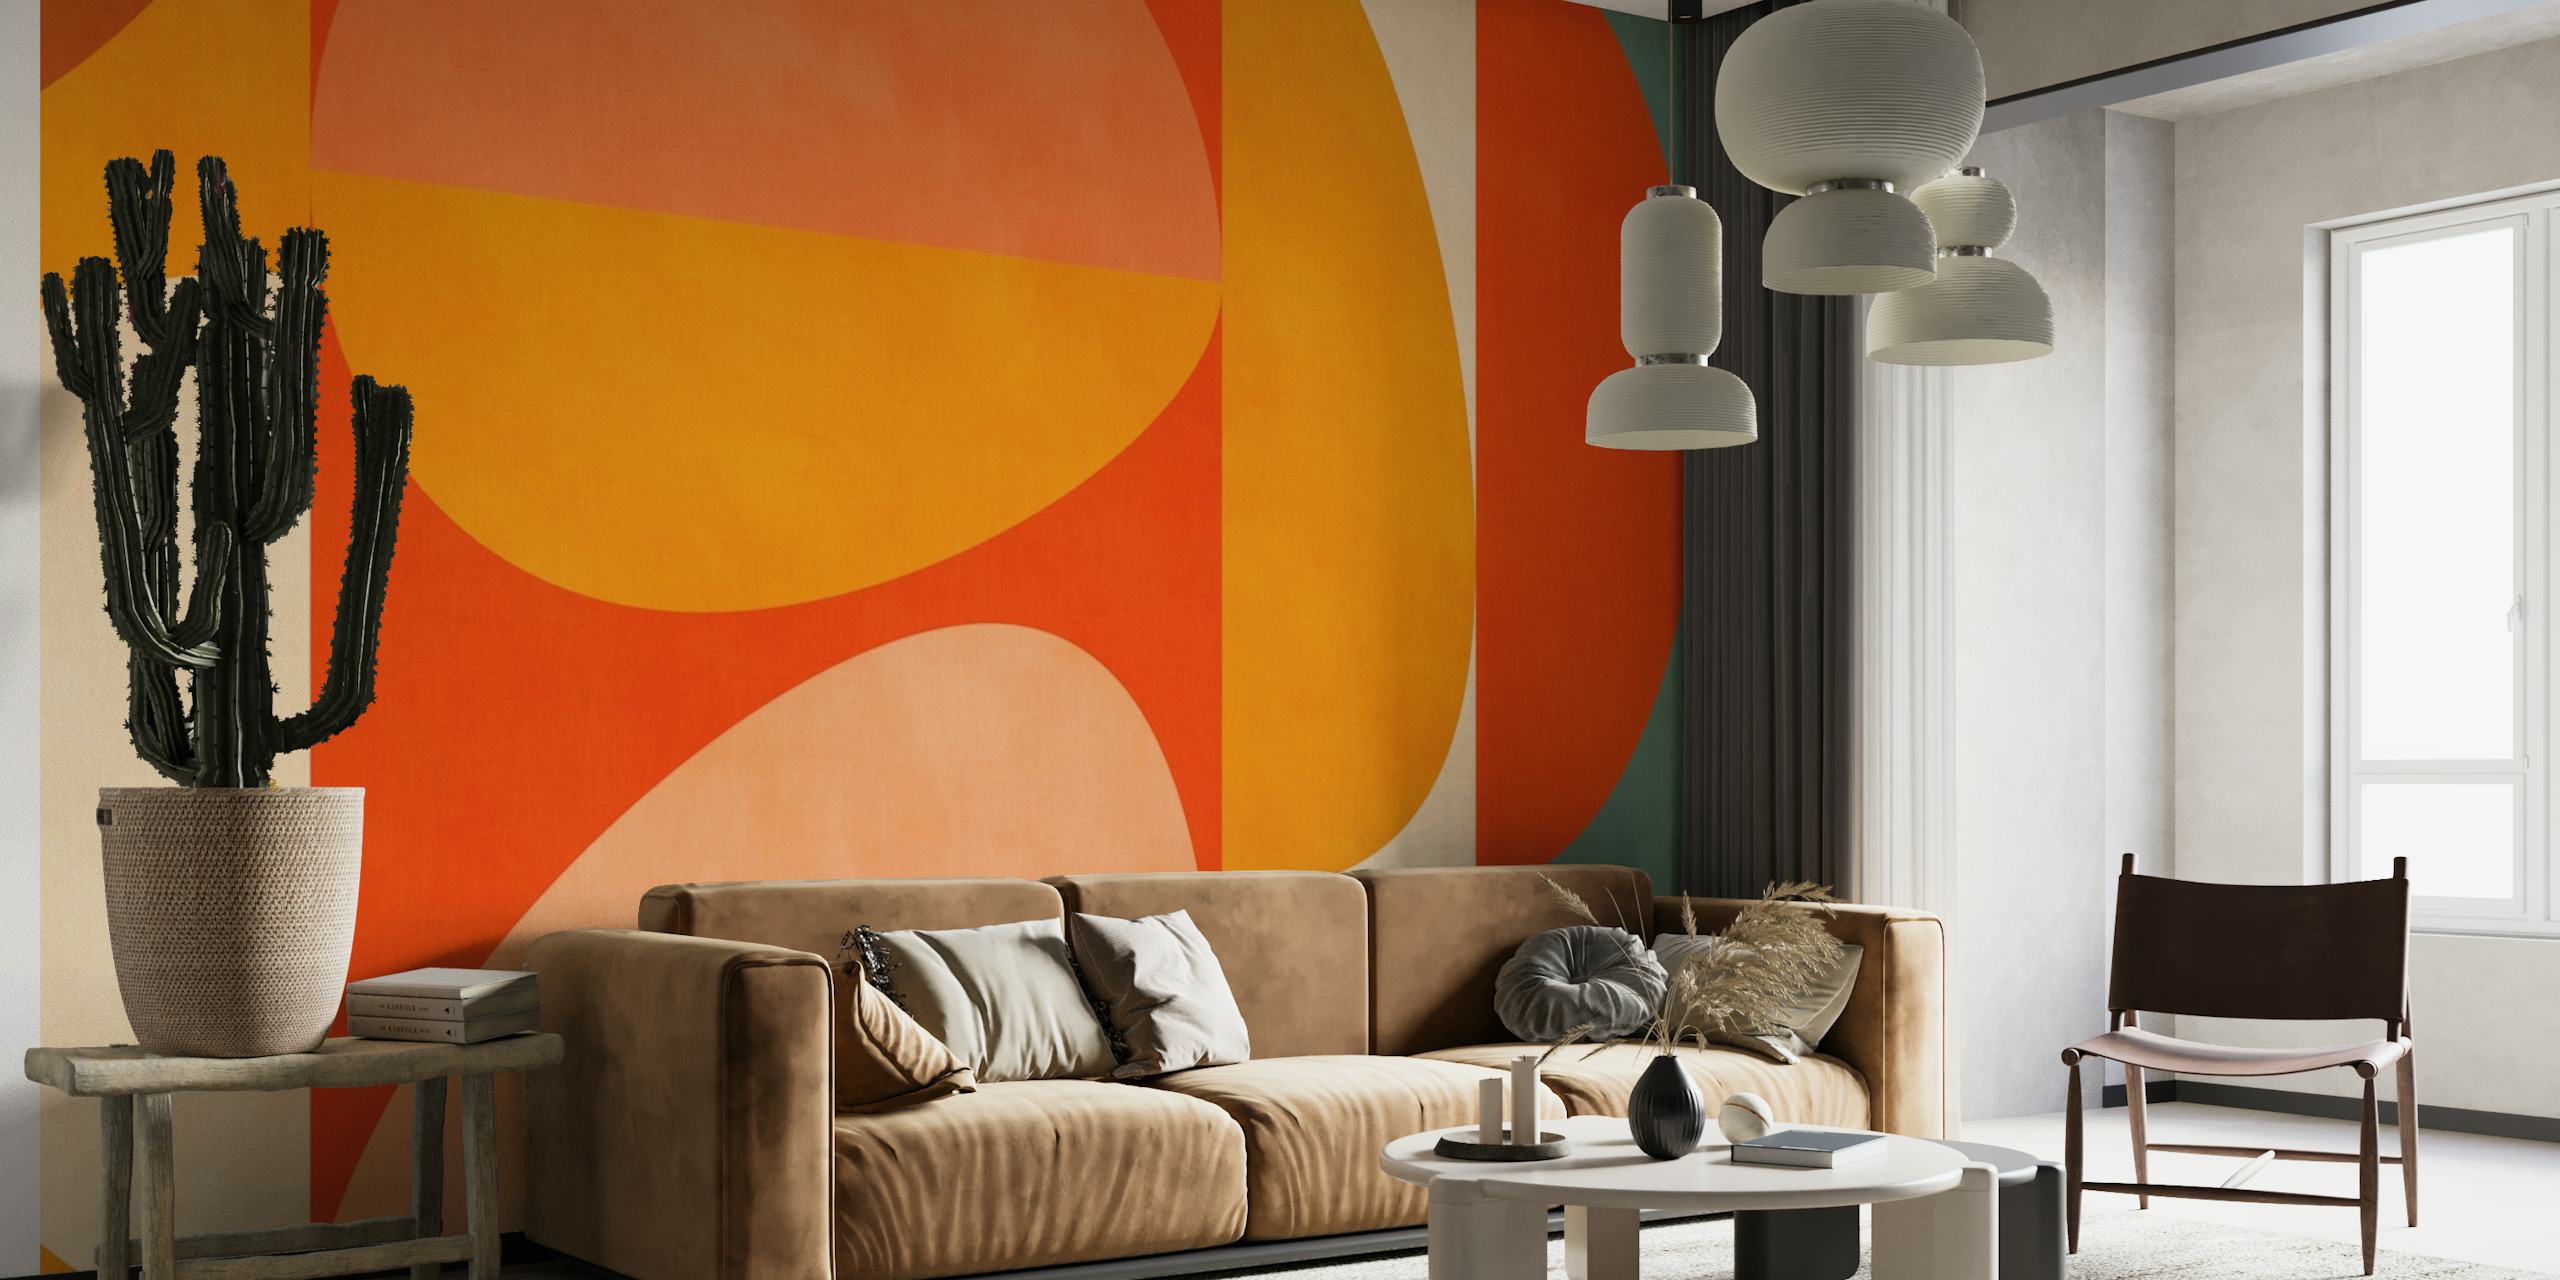 Mid century modern rounded shapes 3:4 ratio papel pintado